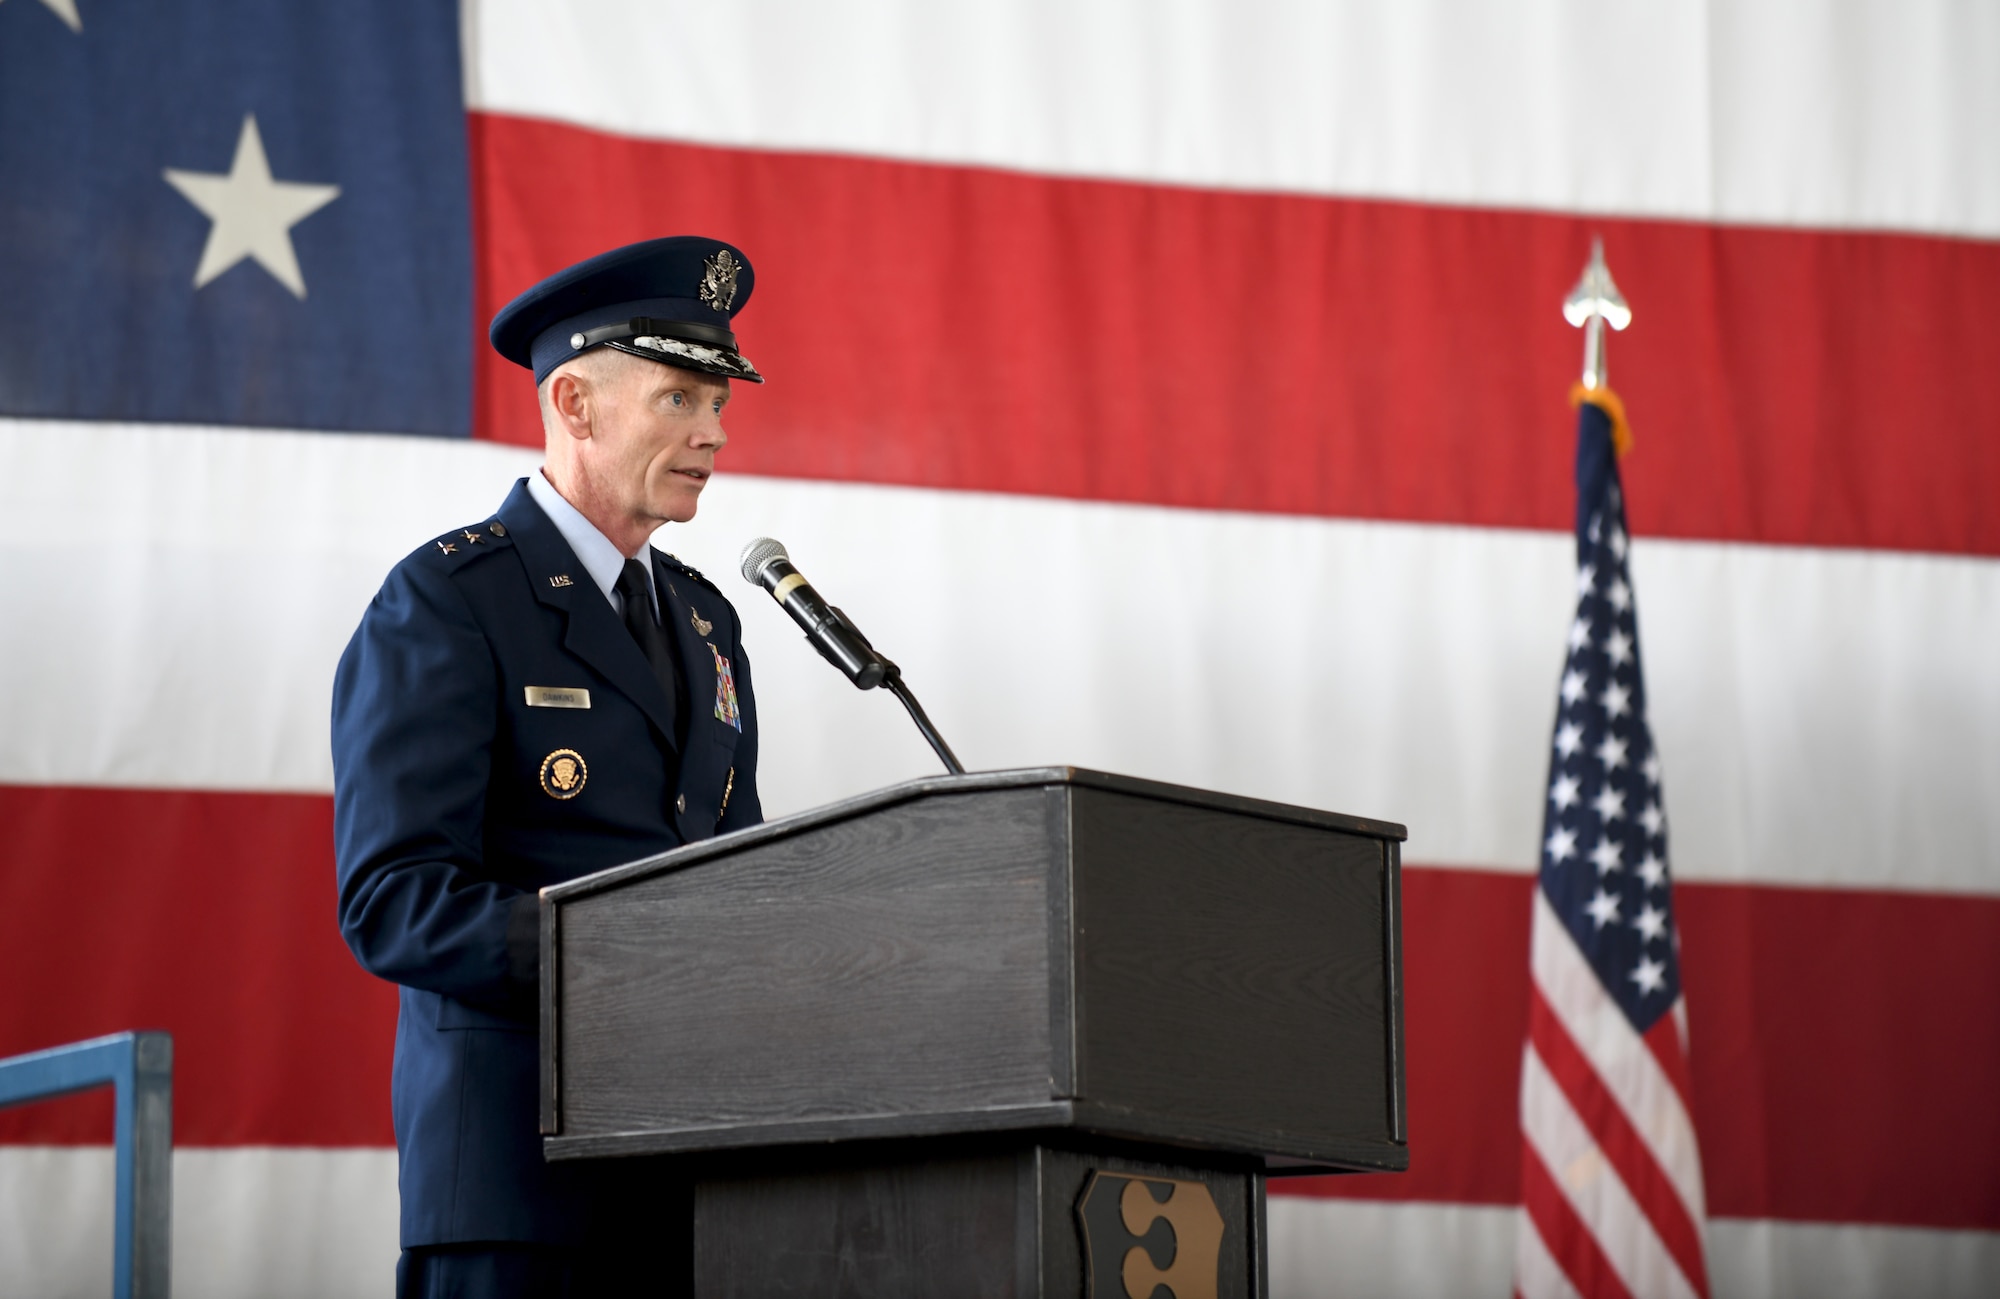 Maj. Gen. James Dawkins Jr., the 8th Air Force commander, delivers a speech during a change of command ceremony at Ellsworth Air Force Base, S.D., May 30, 2019. Dawkins officiated the exchange of command and welcomed Col. David A. Doss, the incoming commander of the 28th Bomb Wing. (U.S. Air Force photo by Airman 1st Class Christina Bennett)